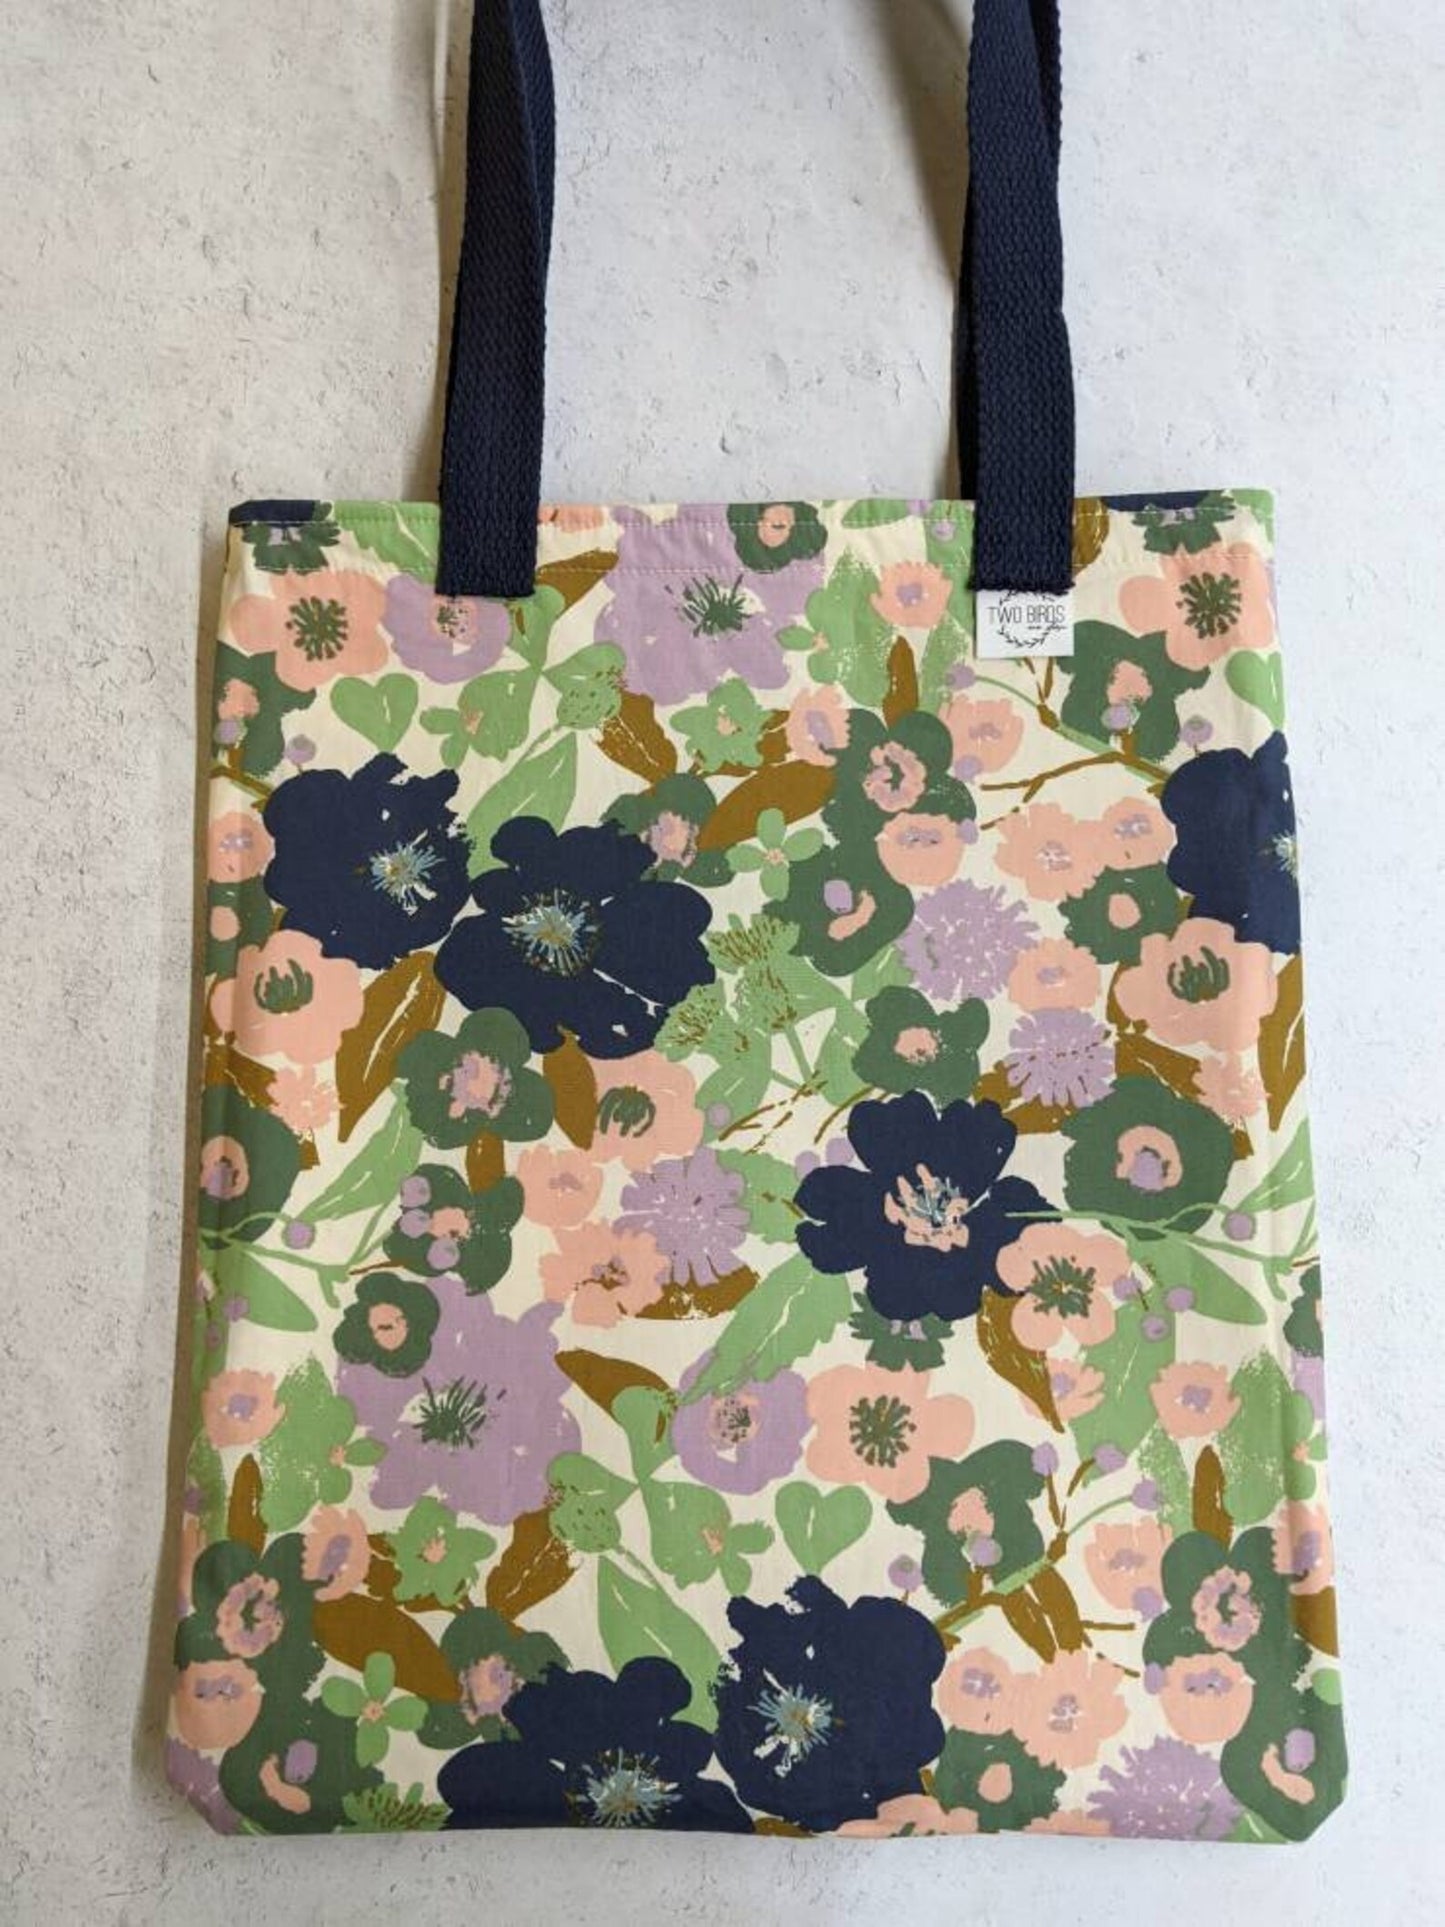 The Reversible Tote Bag - Forest Friends